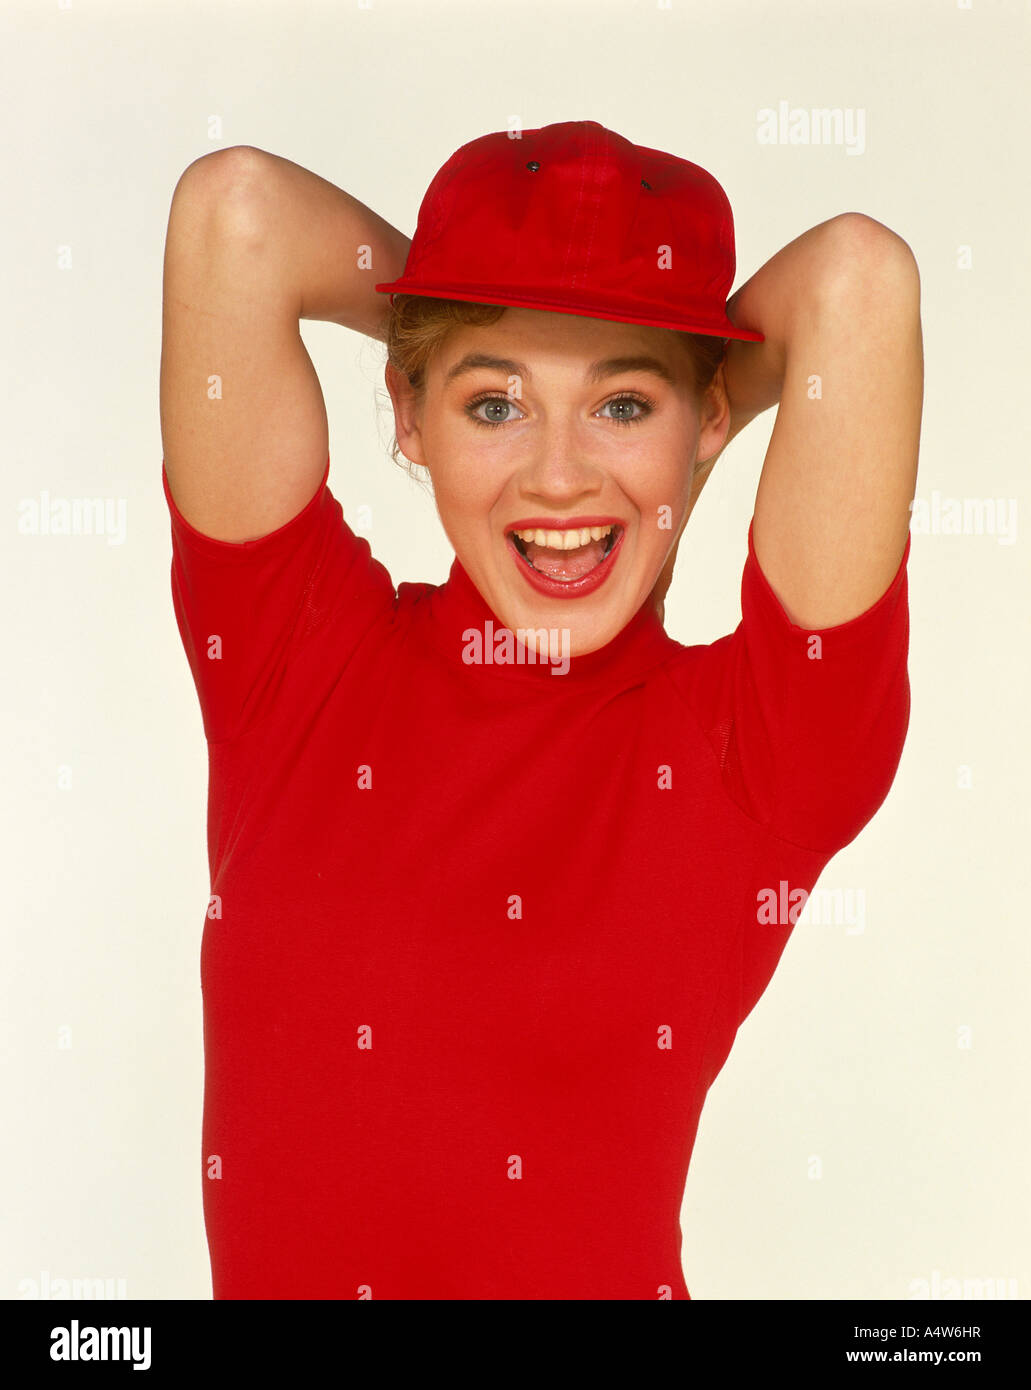 JODY RED TOP AND CAP Stock Photo